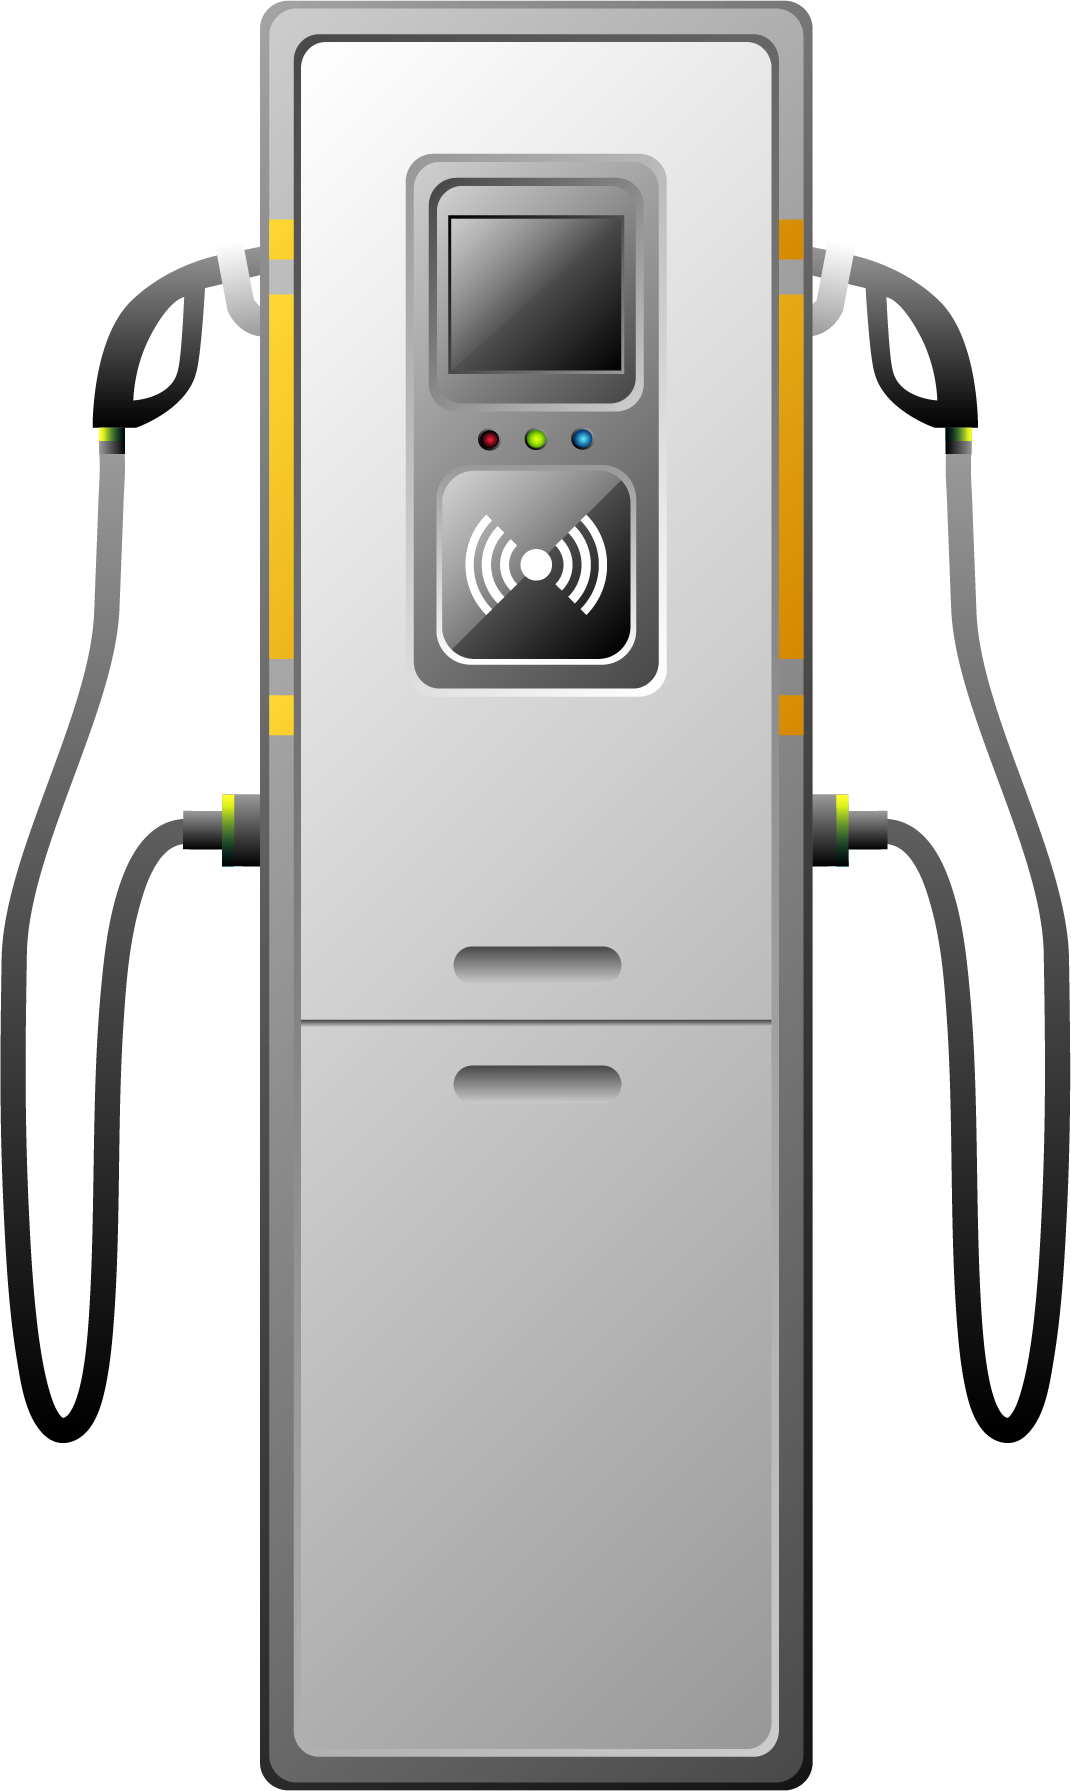 —Pngtree—electric vehicle charging pile_5906583